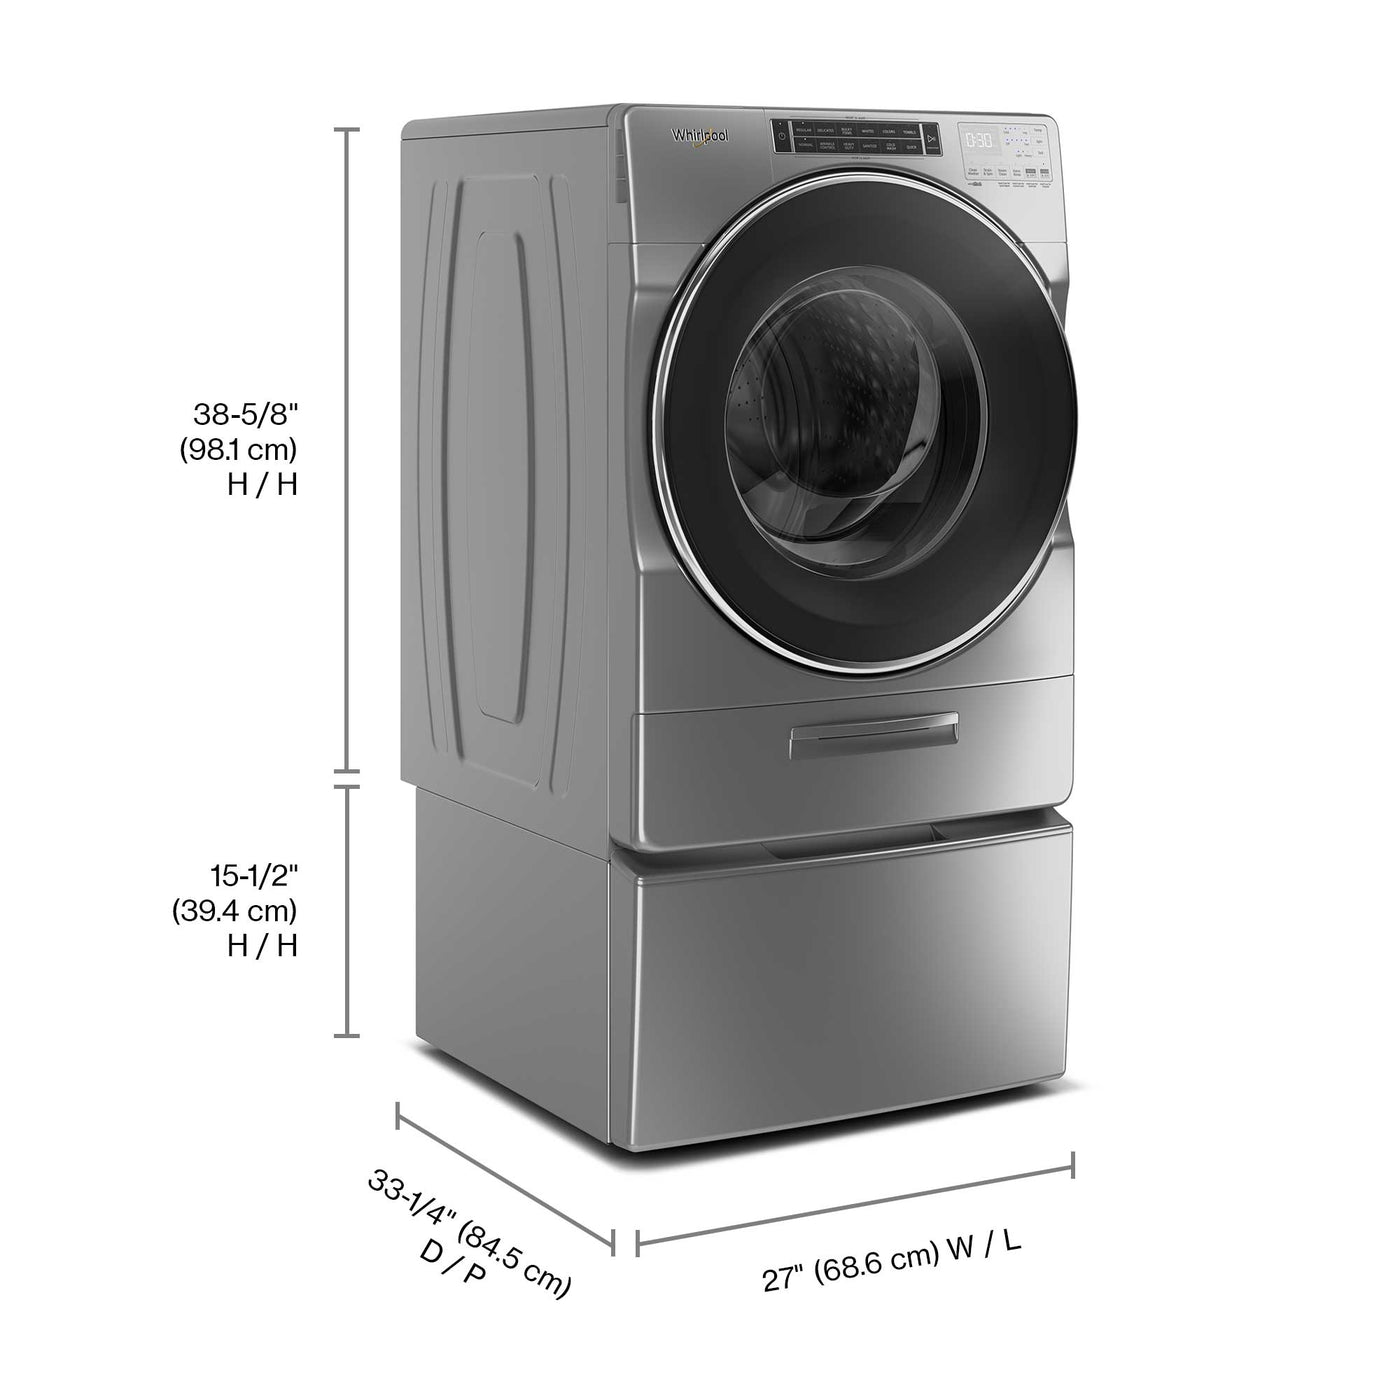 Whirlpool Chrome Shadow Front Load Washer (5.8 cu.ft.) - WFW8620HC